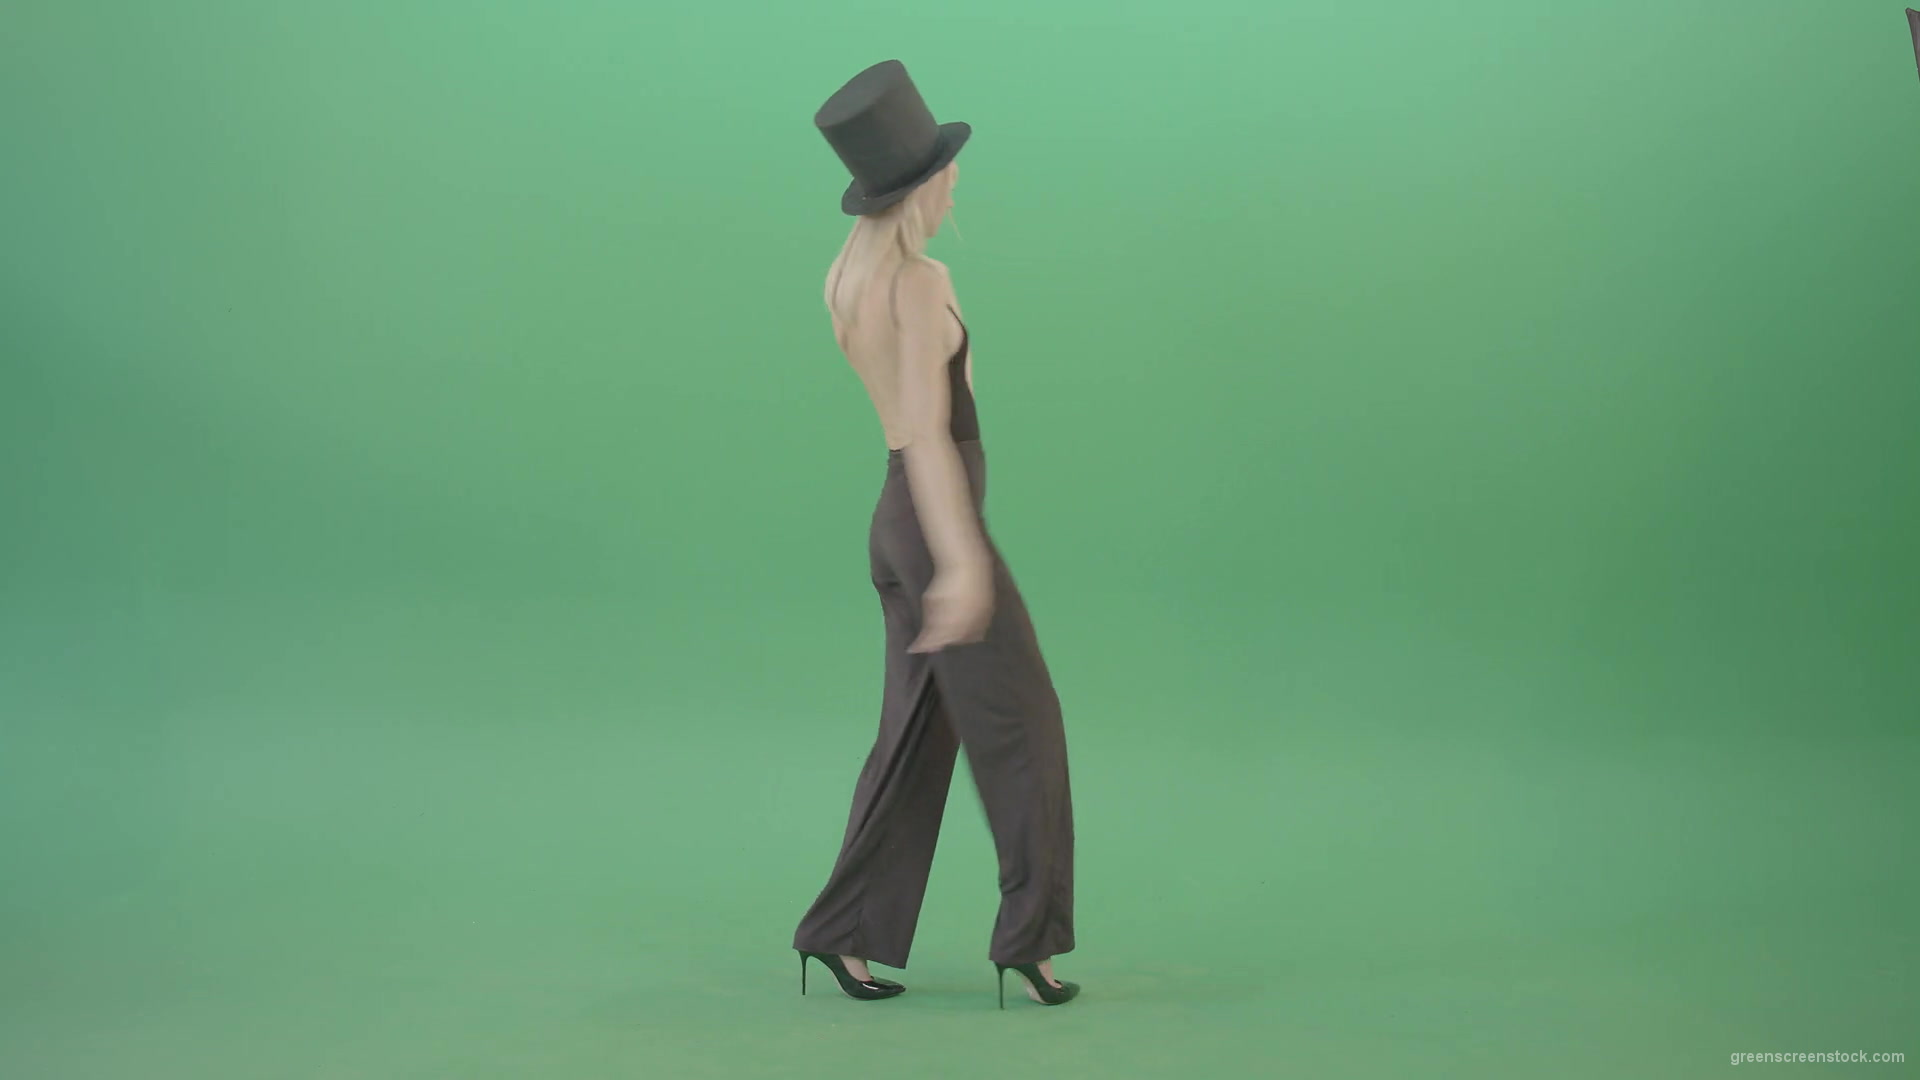 Girl-with-black-busines-cylinder-hat-dancing-isolated-on-green-background-4K-Video-Footage-1920_009 Green Screen Stock